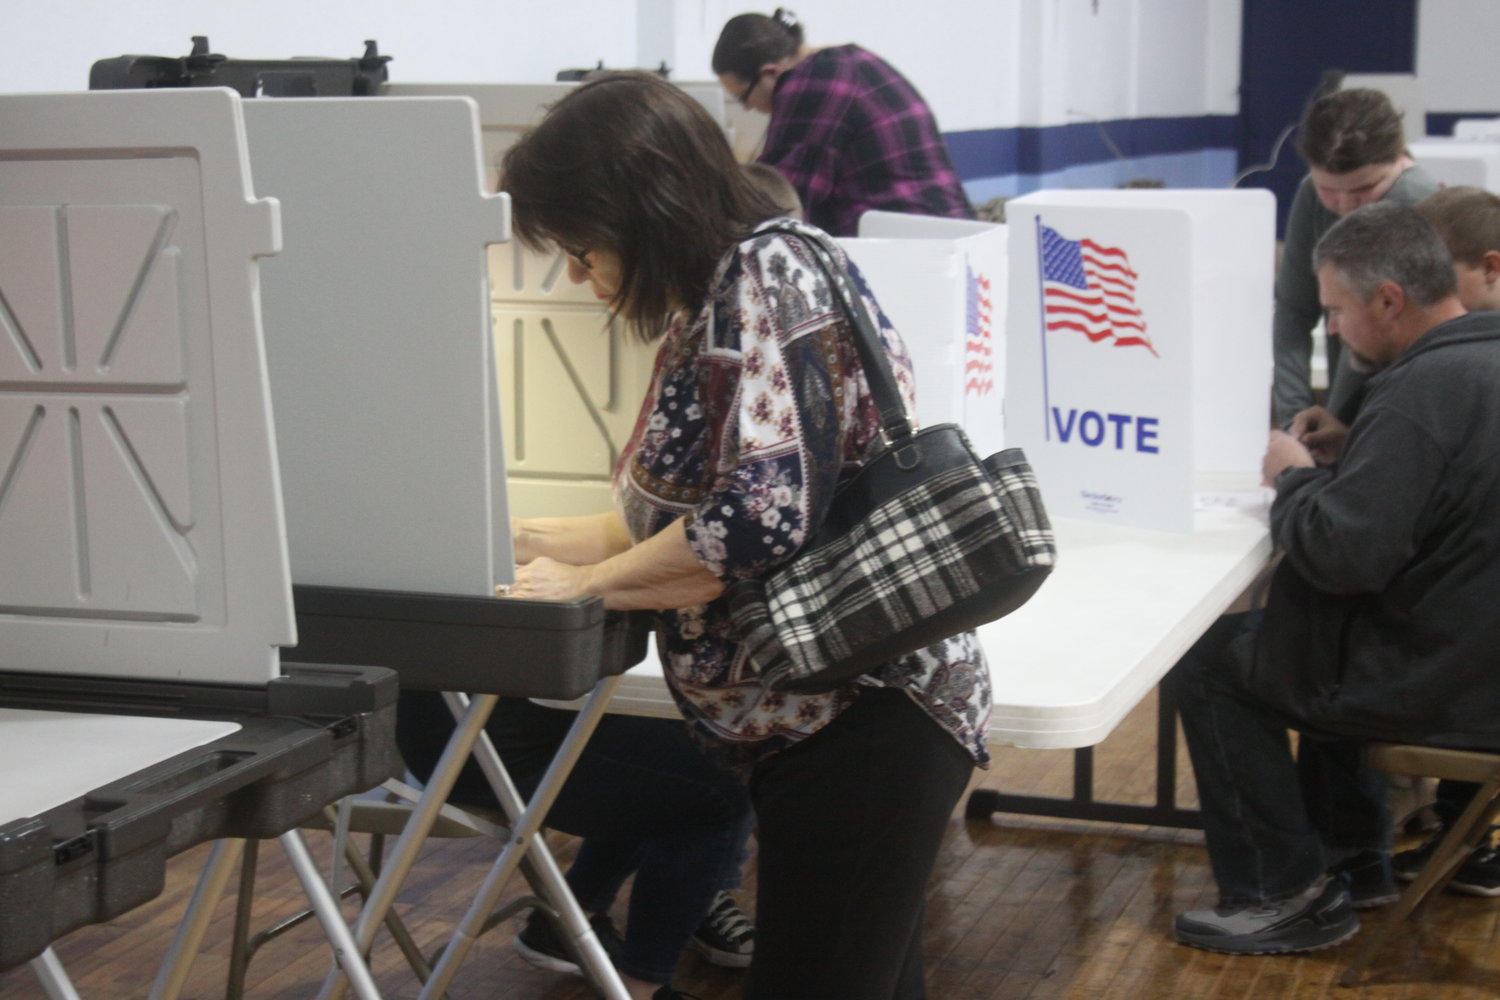 A Montgomery City resident votes during the early morning hours on Nov. 8 at the Knights of Columbus building.